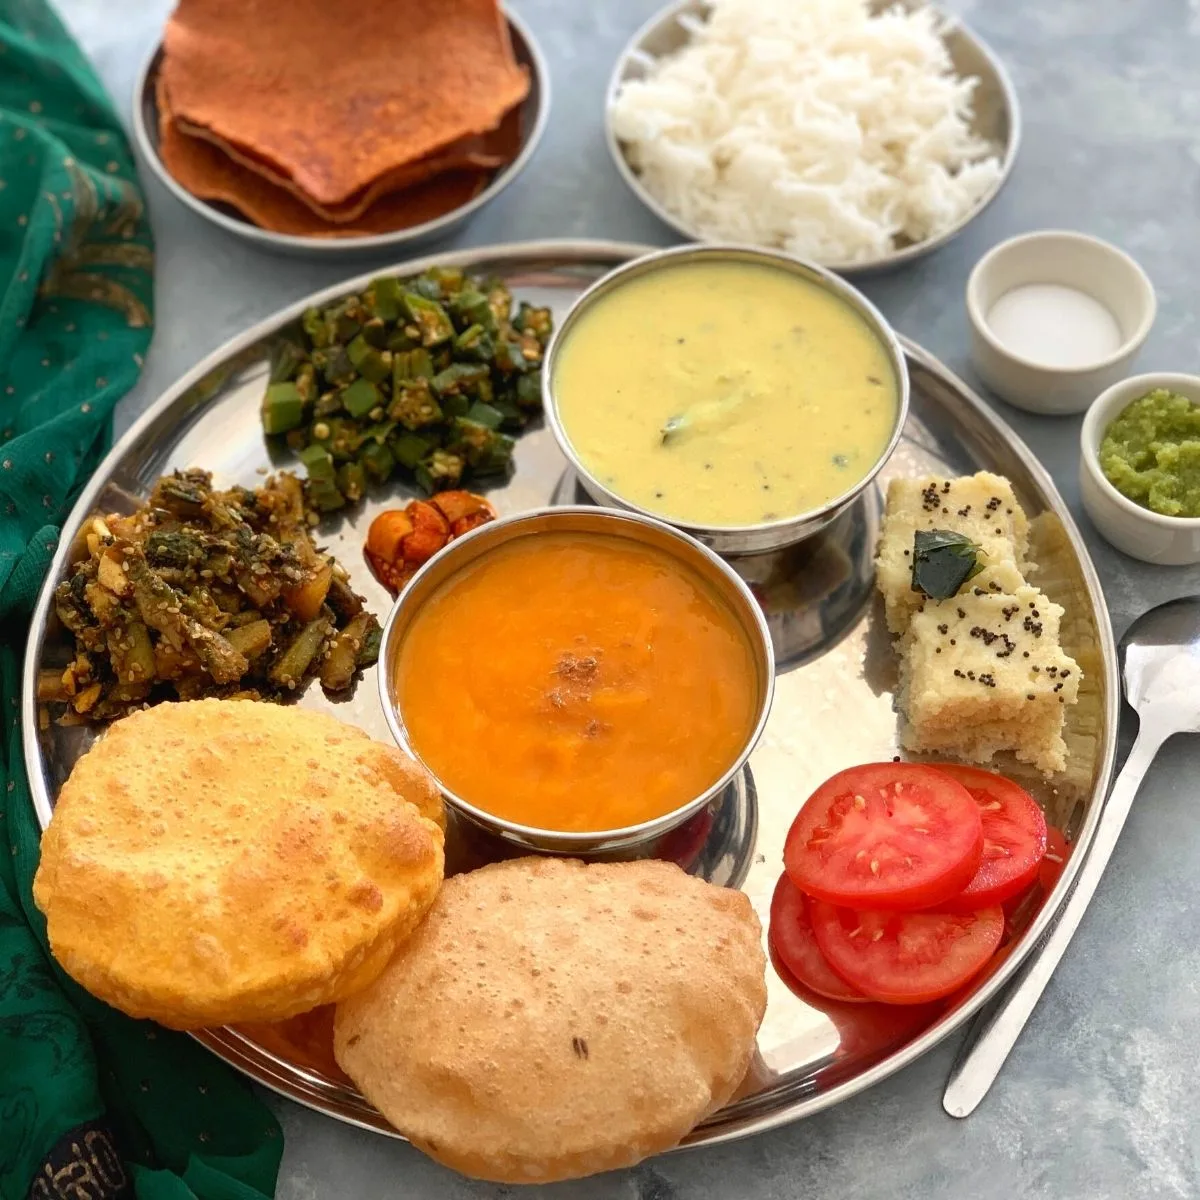 Gujarati Thali is a spectacular treat and fusion of sweet, salty, and spicy flavors all combined in a classic Indian Regional thali.